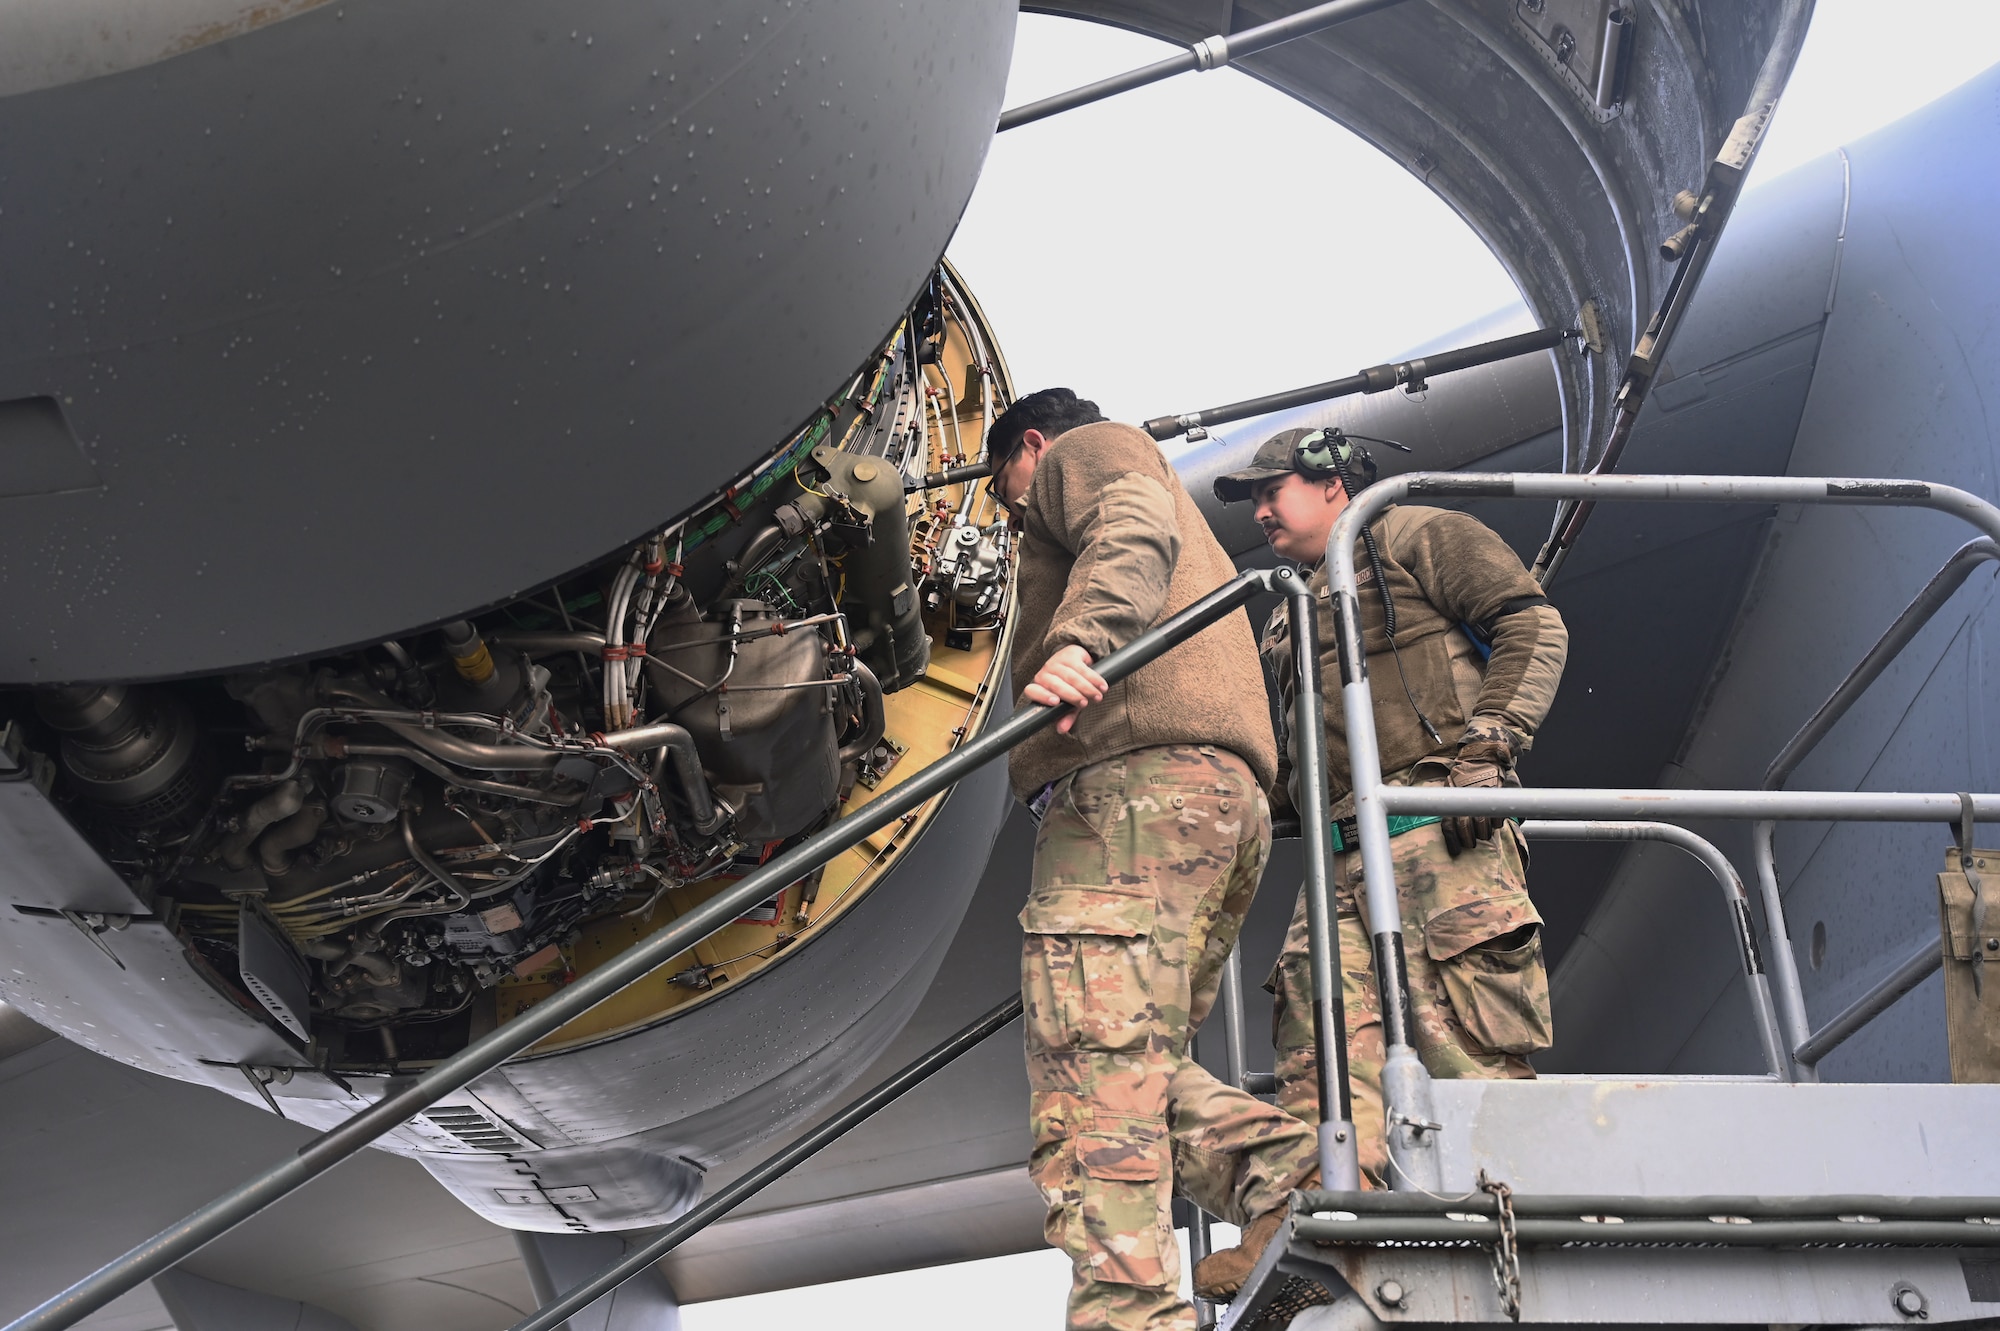 The 373rd TRS is only one of two C-17 Globemaster III training schools in the U.S. Air Force. The unit plays a vital role in producing expert maintainers for the Air force’s global airlift mission.